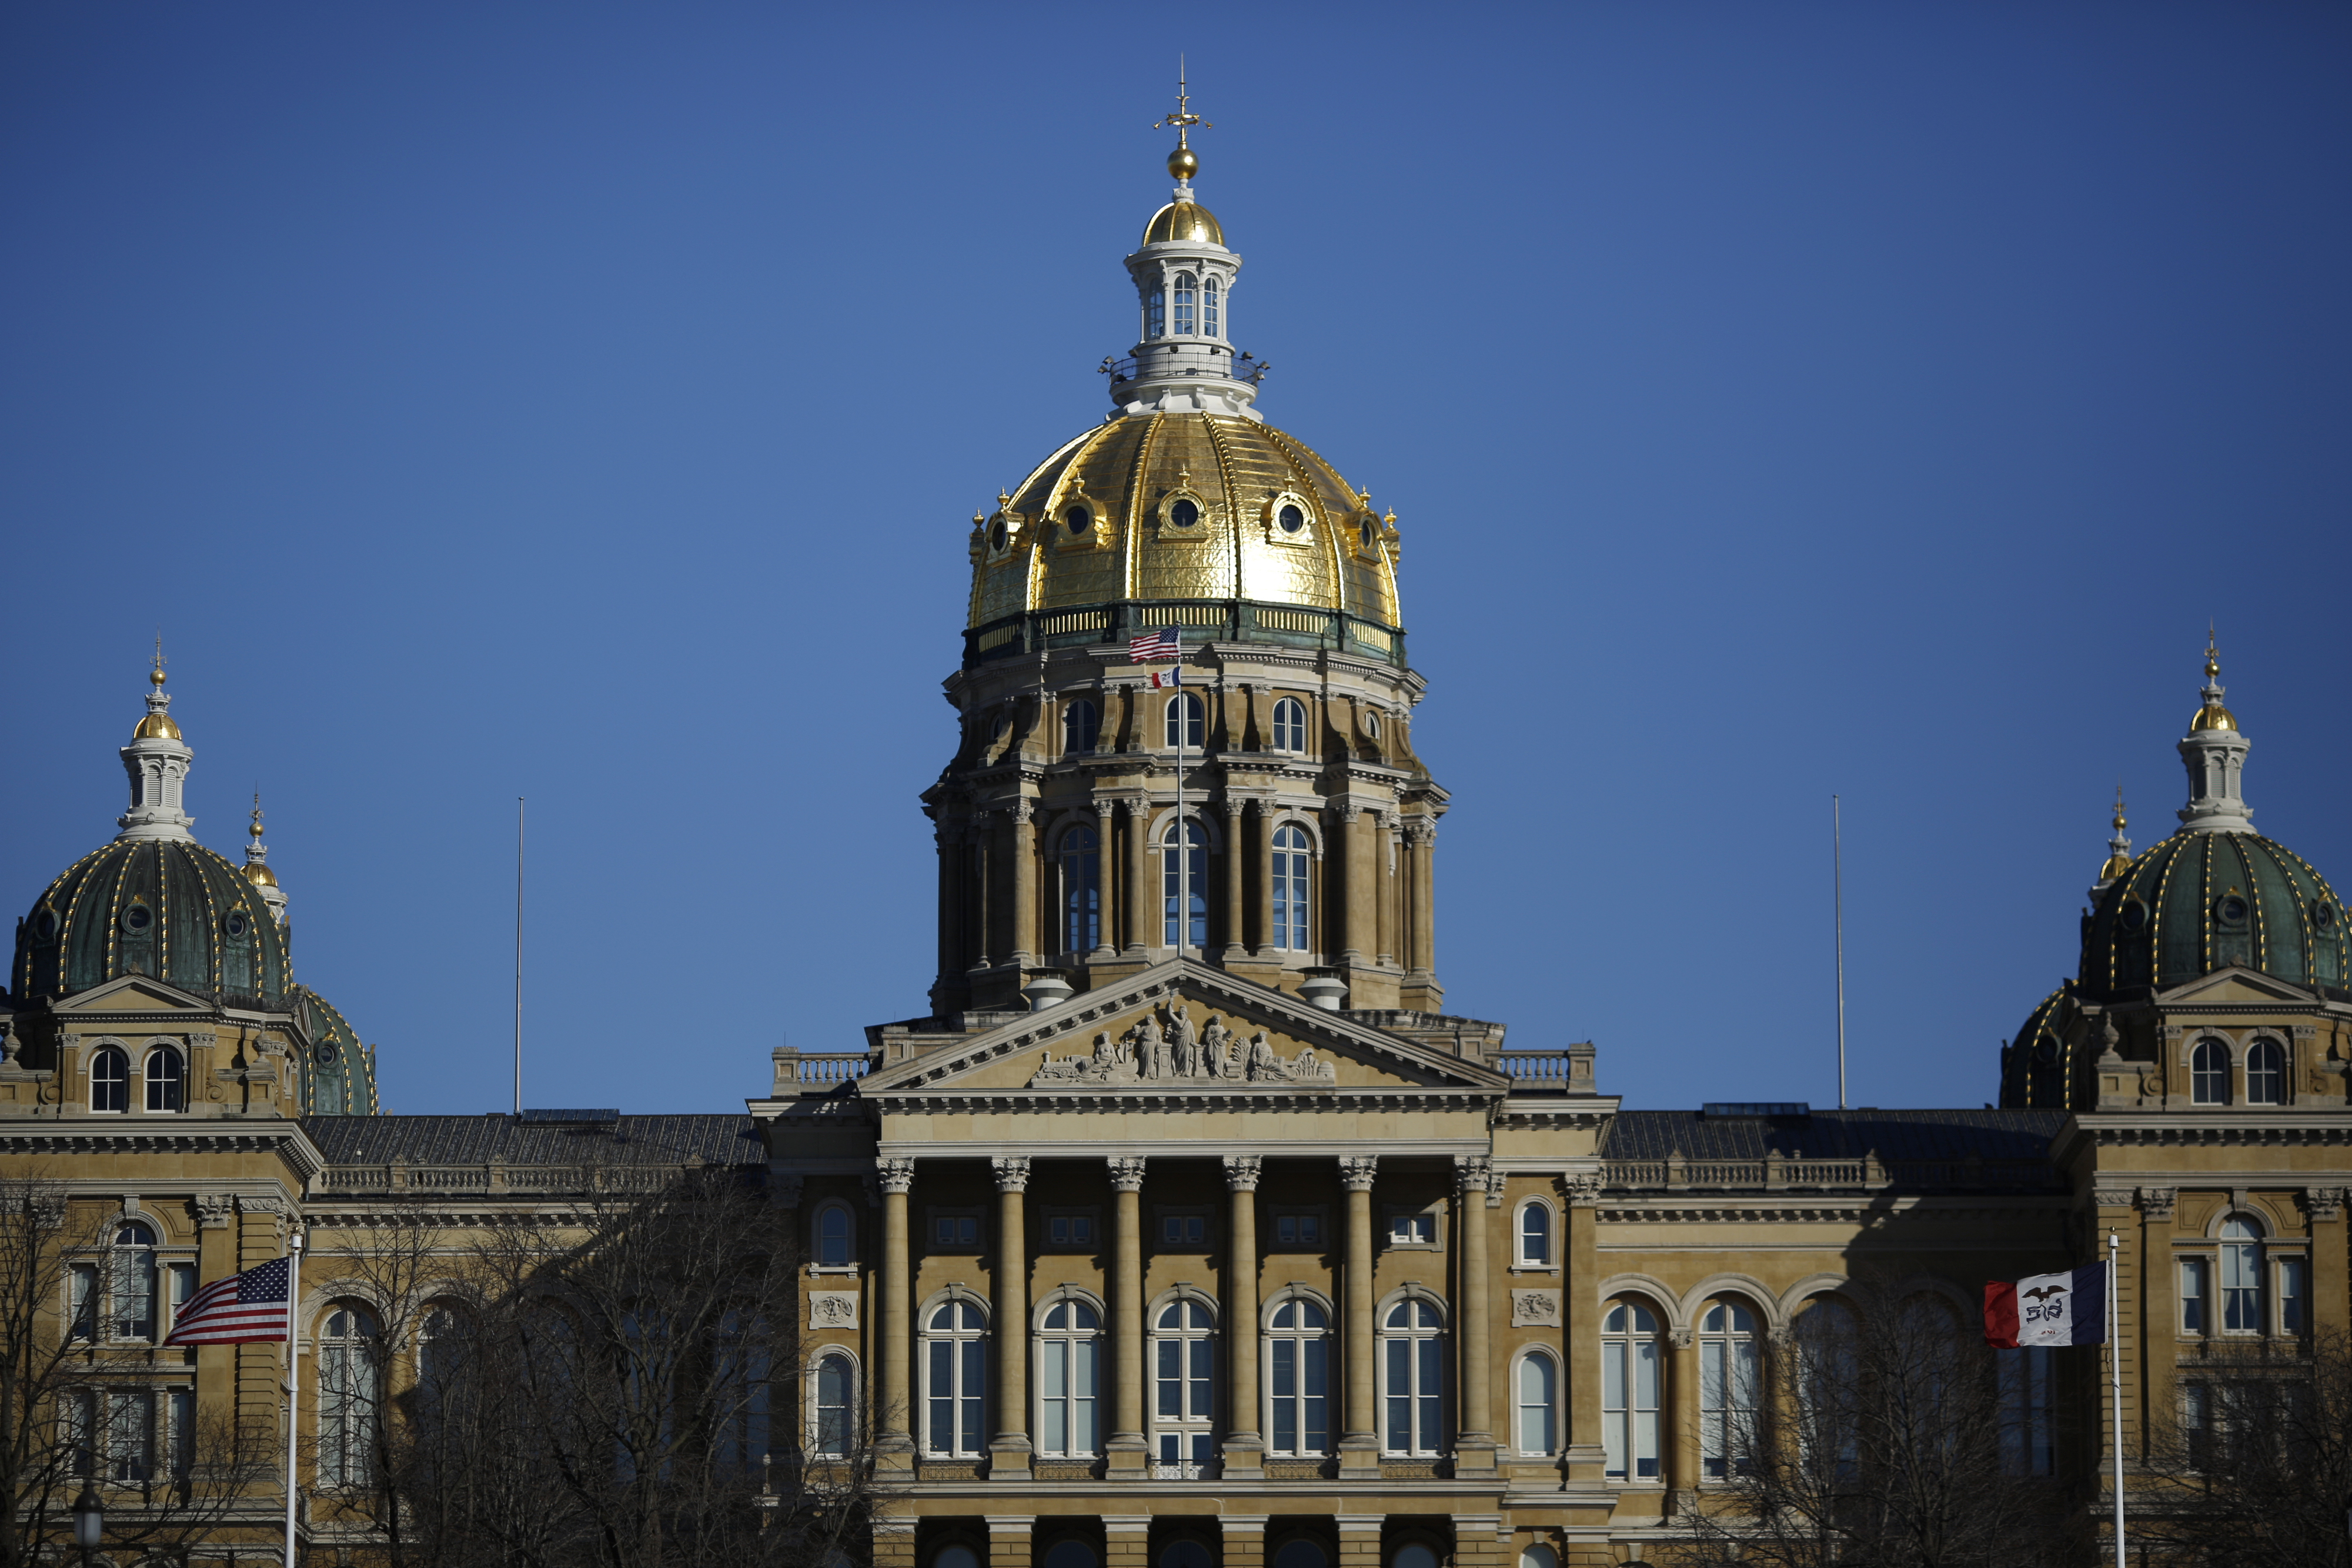 The Iowa State Capitol Building stands in Des Moines, Iowa, U.S., on Friday, Jan. 29, 2016. As the first in the nation Iowa caucuses approaches, where registering your vote isn't as simple as casting a ballot, the state is starting to thrum with nervous energy. Photographer: Luke Sharrett/Bloomberg via Getty Images (Bloomberg&mdash;Bloomberg via Getty Images)